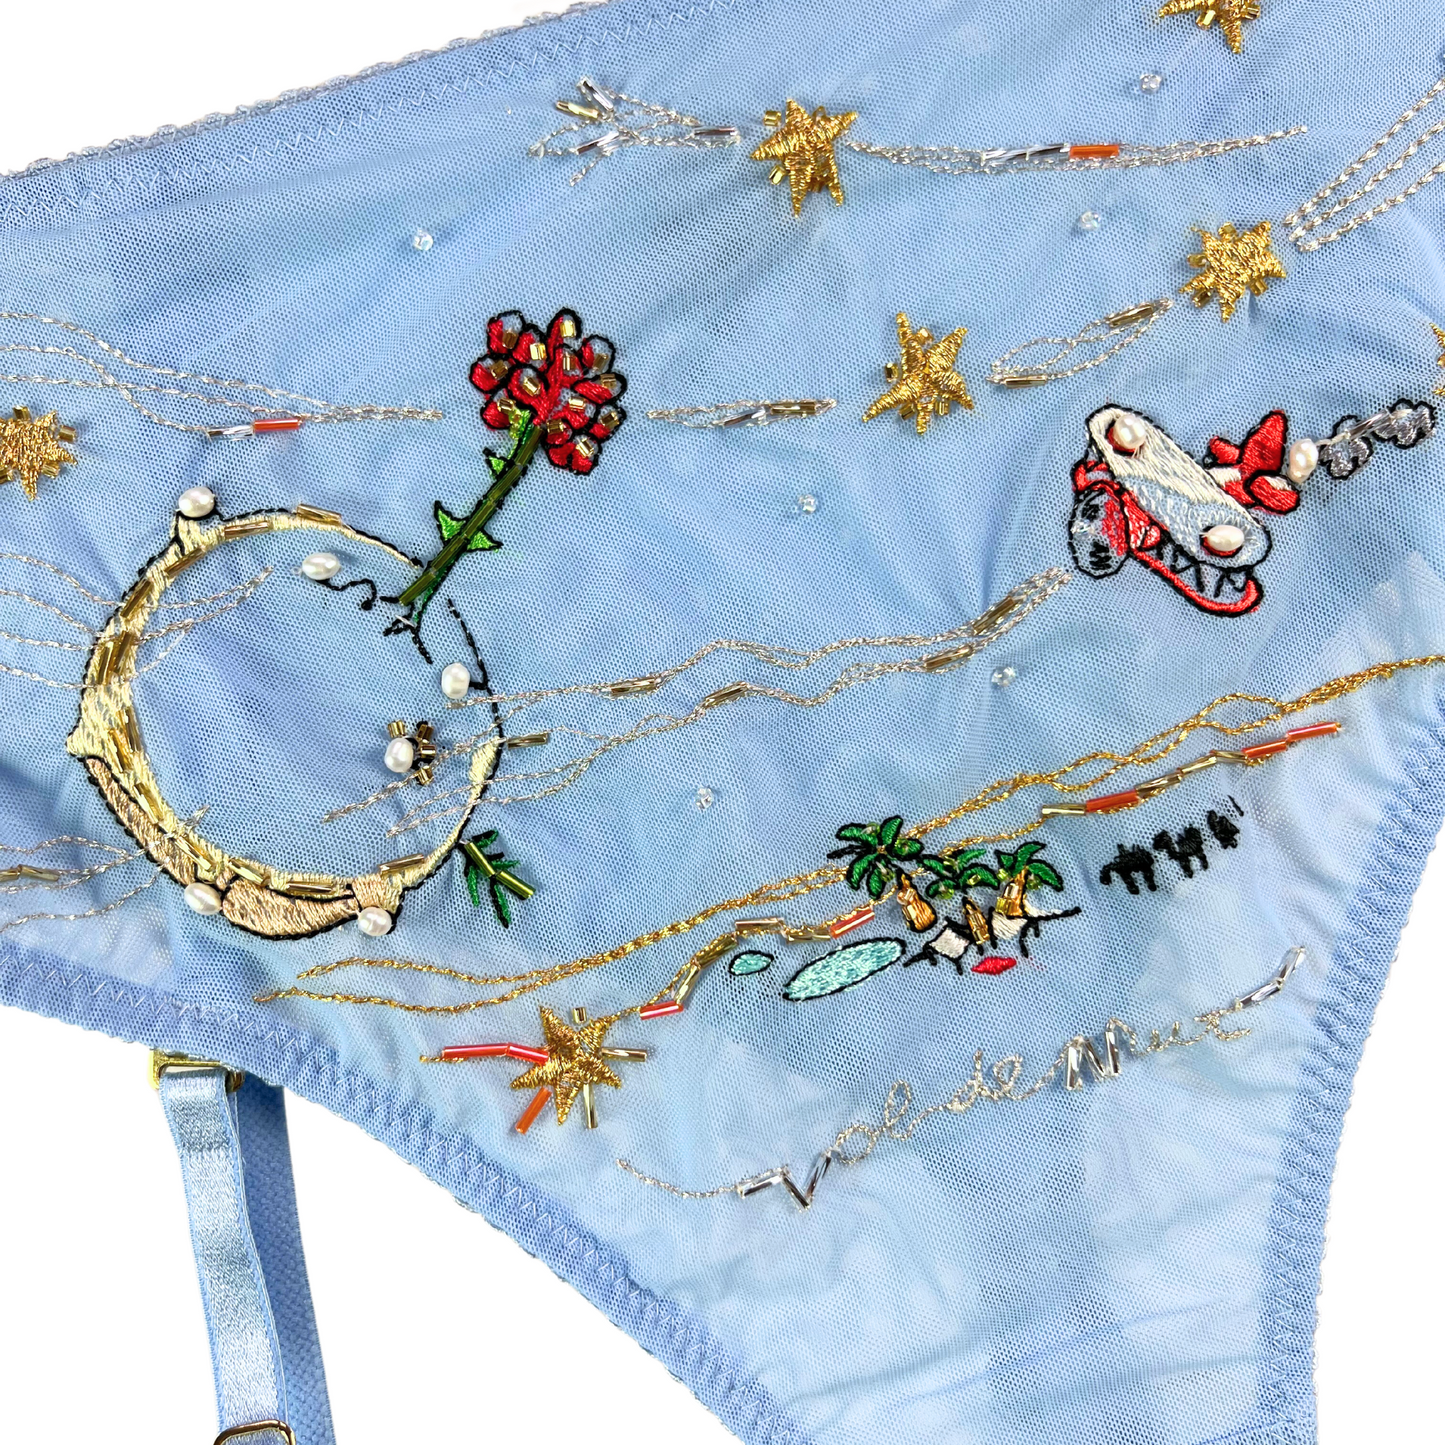 Love and Swans Le Petit Prince High Waist Knicker